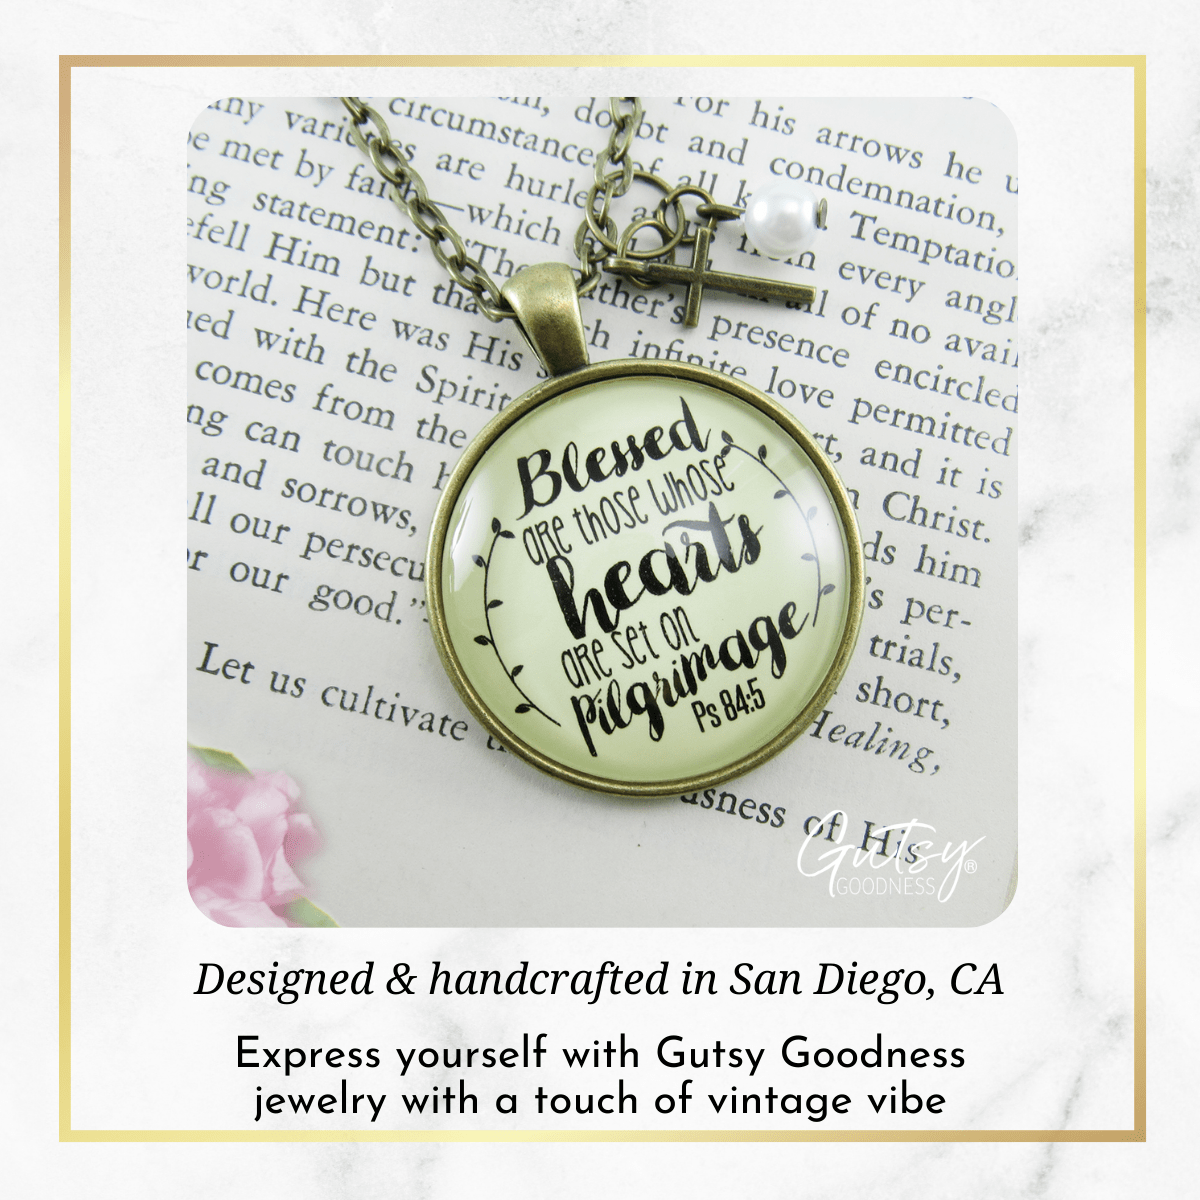 Gutsy Goodness Faith Necklace Blessed is She Whose Heart Set Pilgrimage Journey Jewelry - Gutsy Goodness Handmade Jewelry;Faith Necklace Blessed Is She Whose Heart Set Pilgrimage Journey Jewelry - Gutsy Goodness Handmade Jewelry Gifts